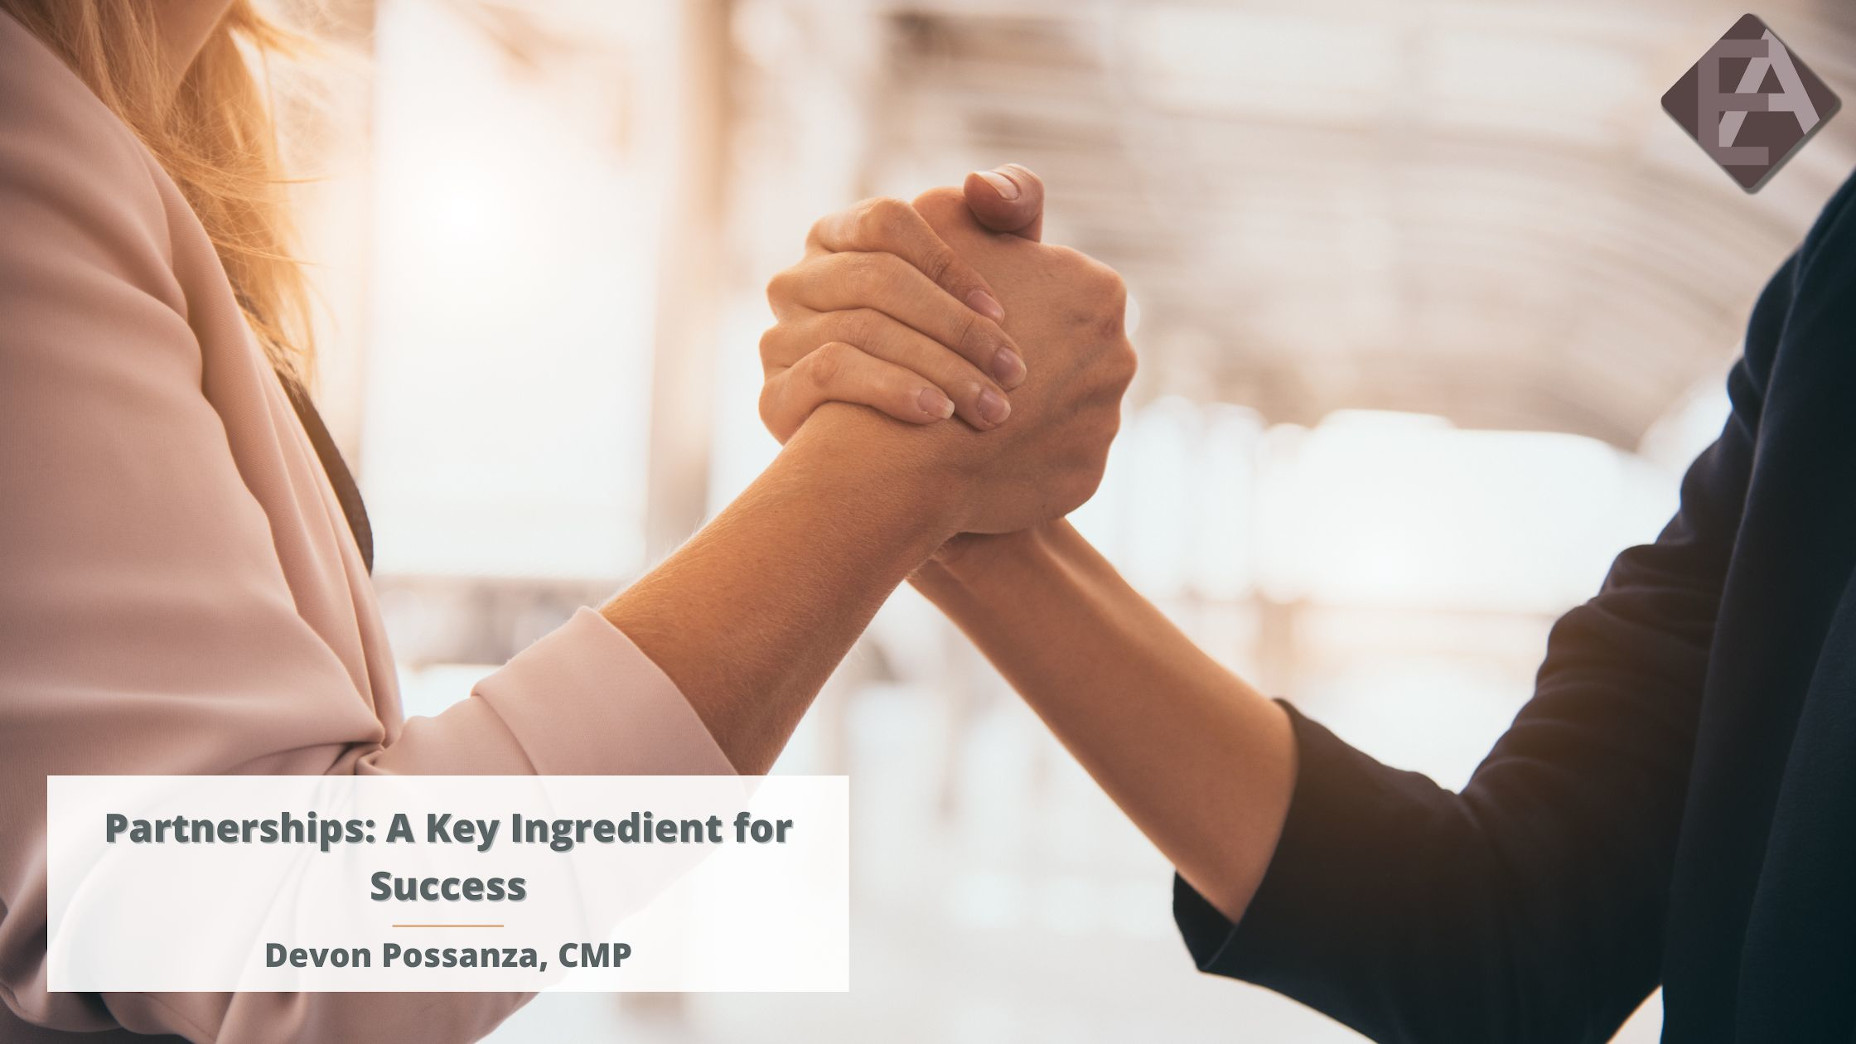 Partnerships: A Key Ingredient for Success